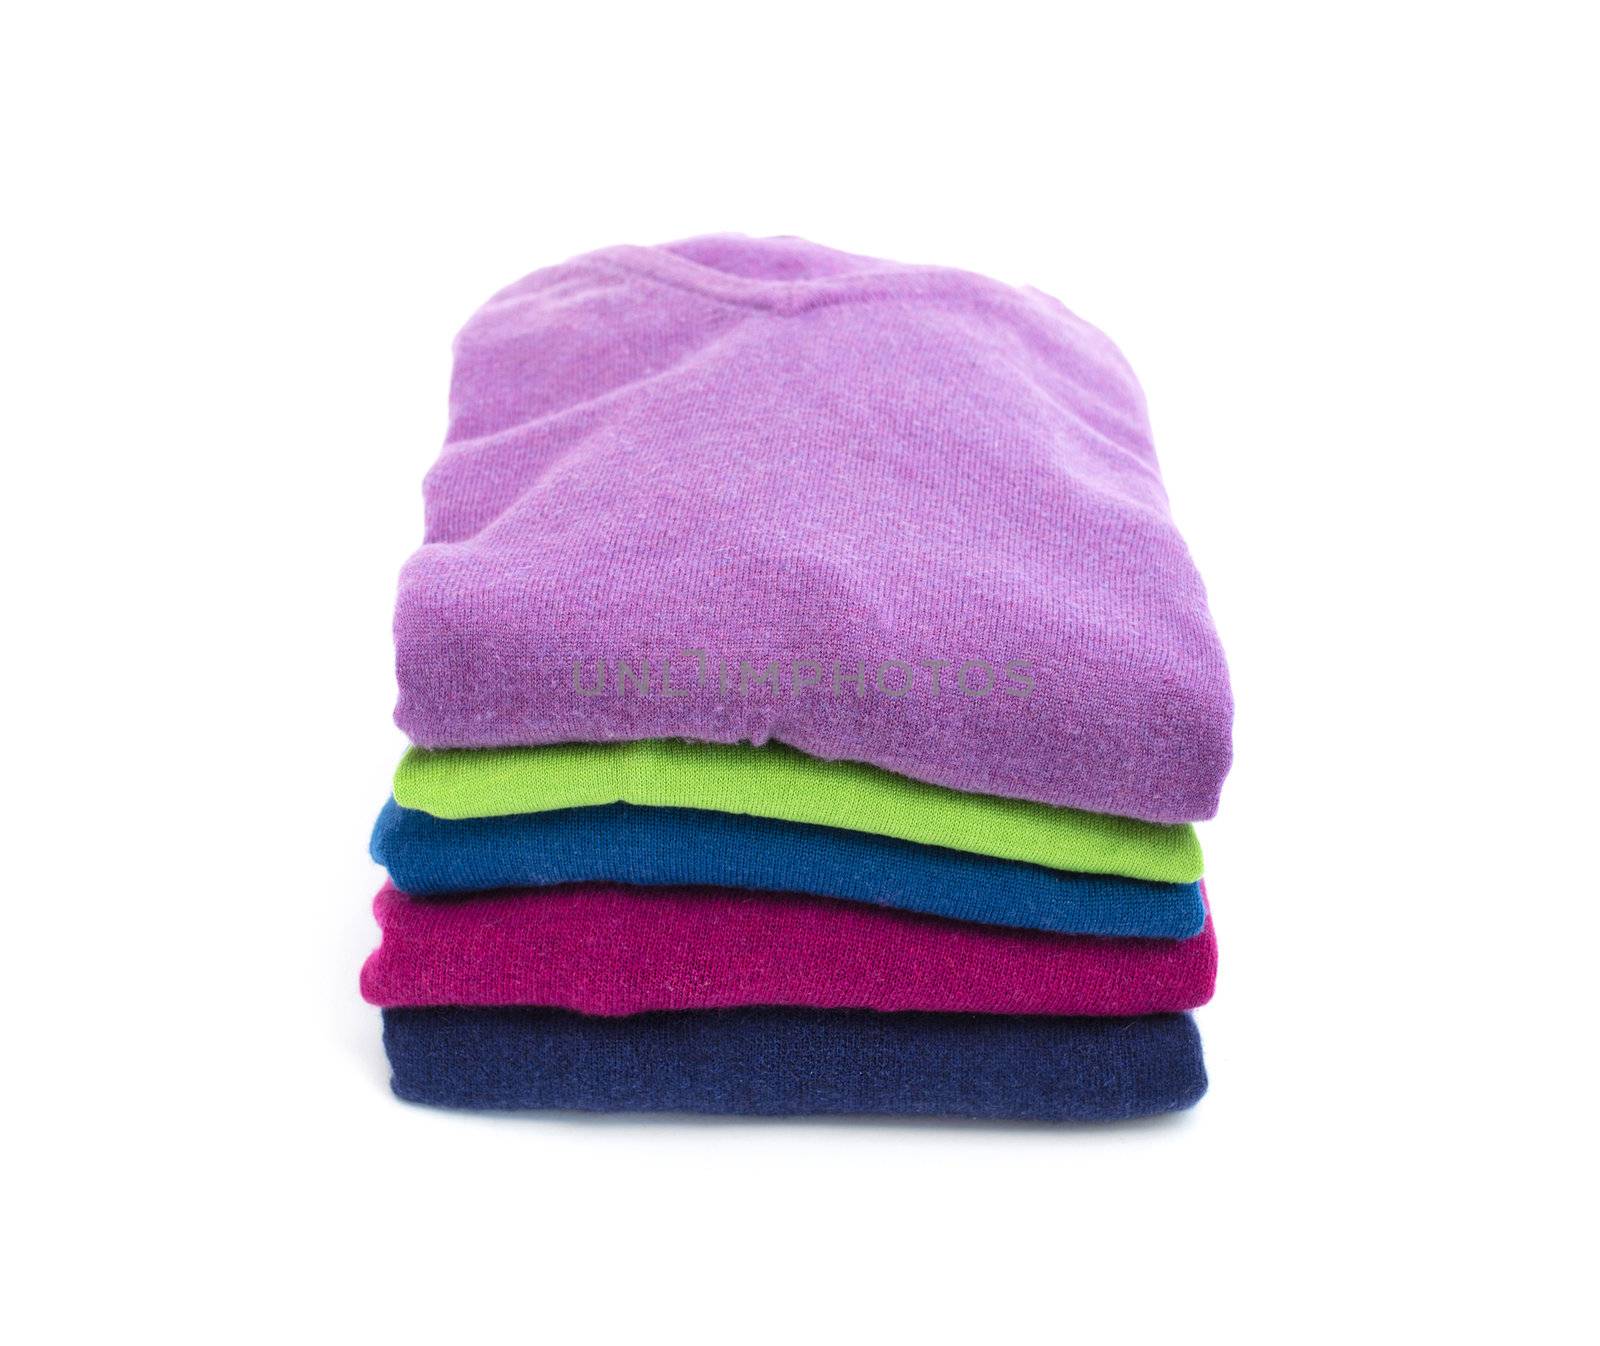 Stack of colorful wool sweaters by artofphoto